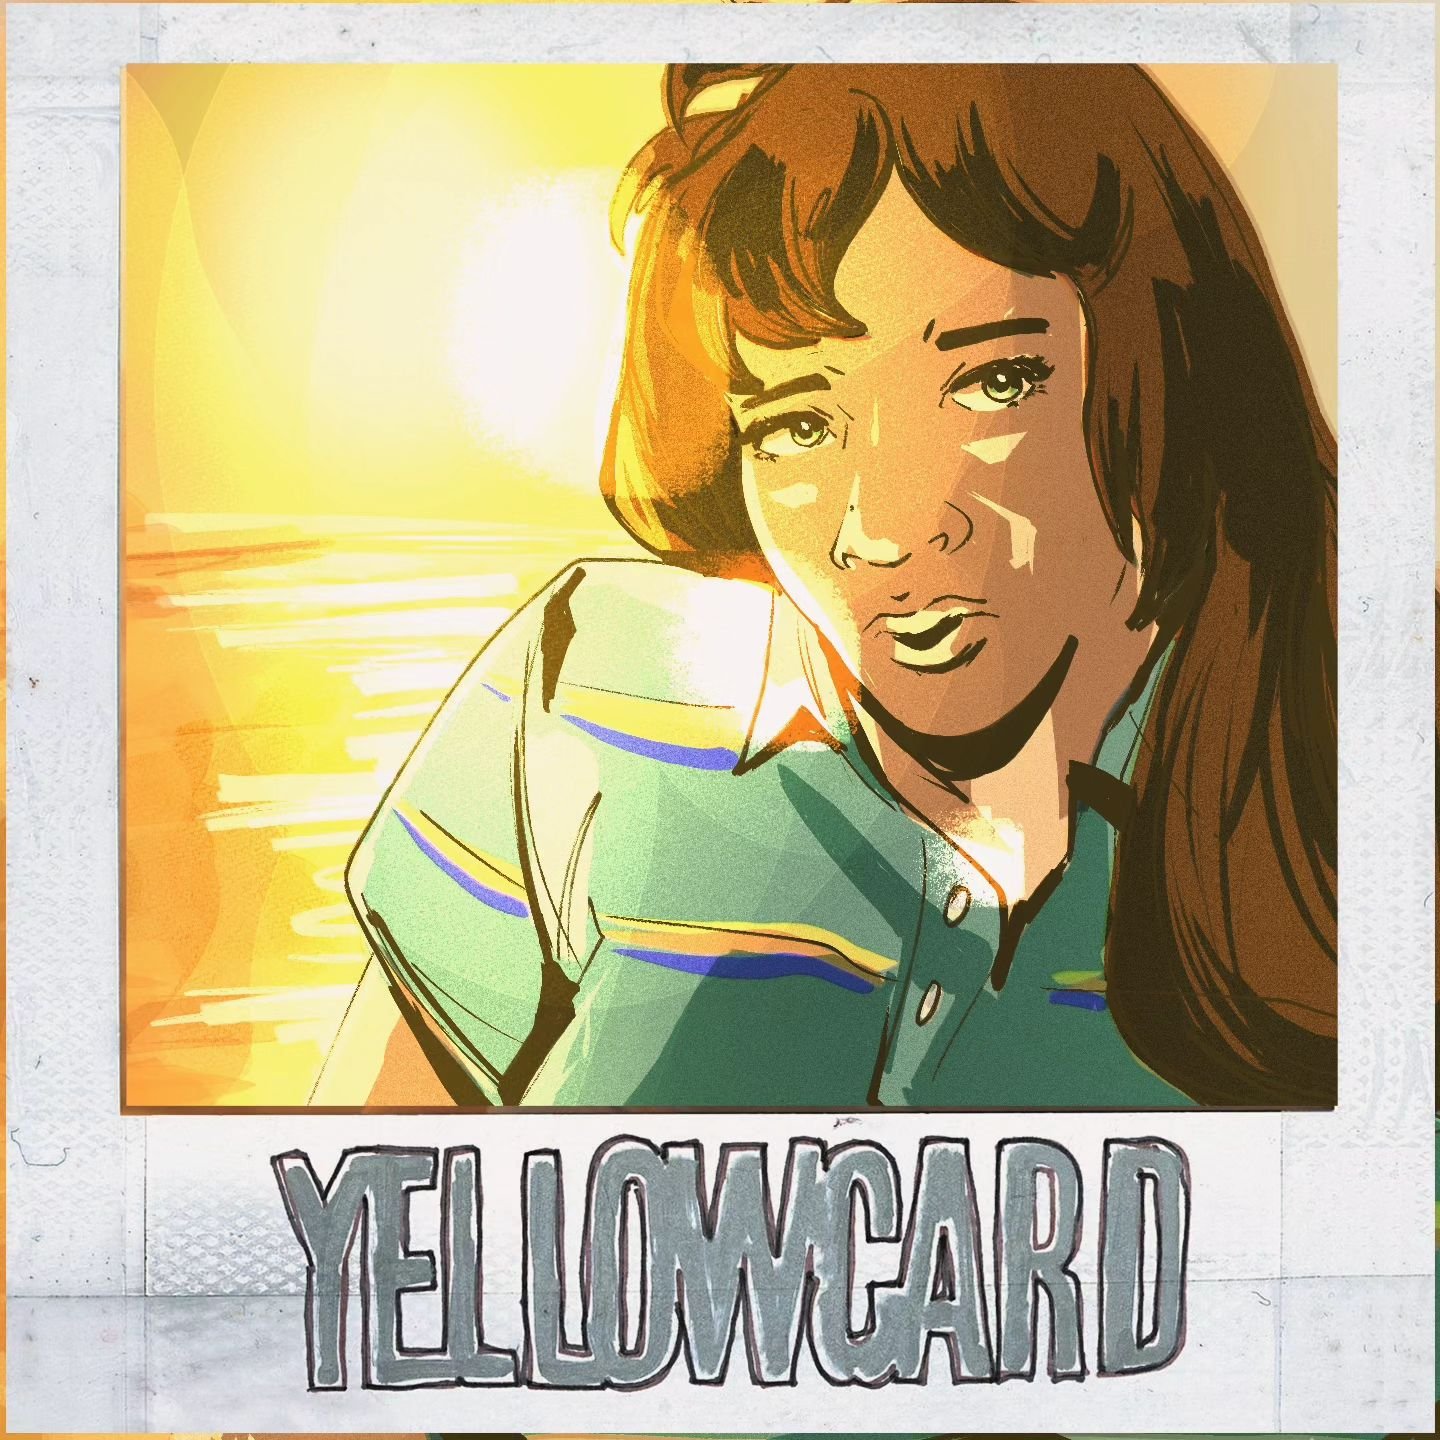 This album has been on rotation lately. Why? No idea. Just thought I'd redraw it.
&bull;&bull;&bull;
#yellowcard #albumart #oceanavenue #eyinjay